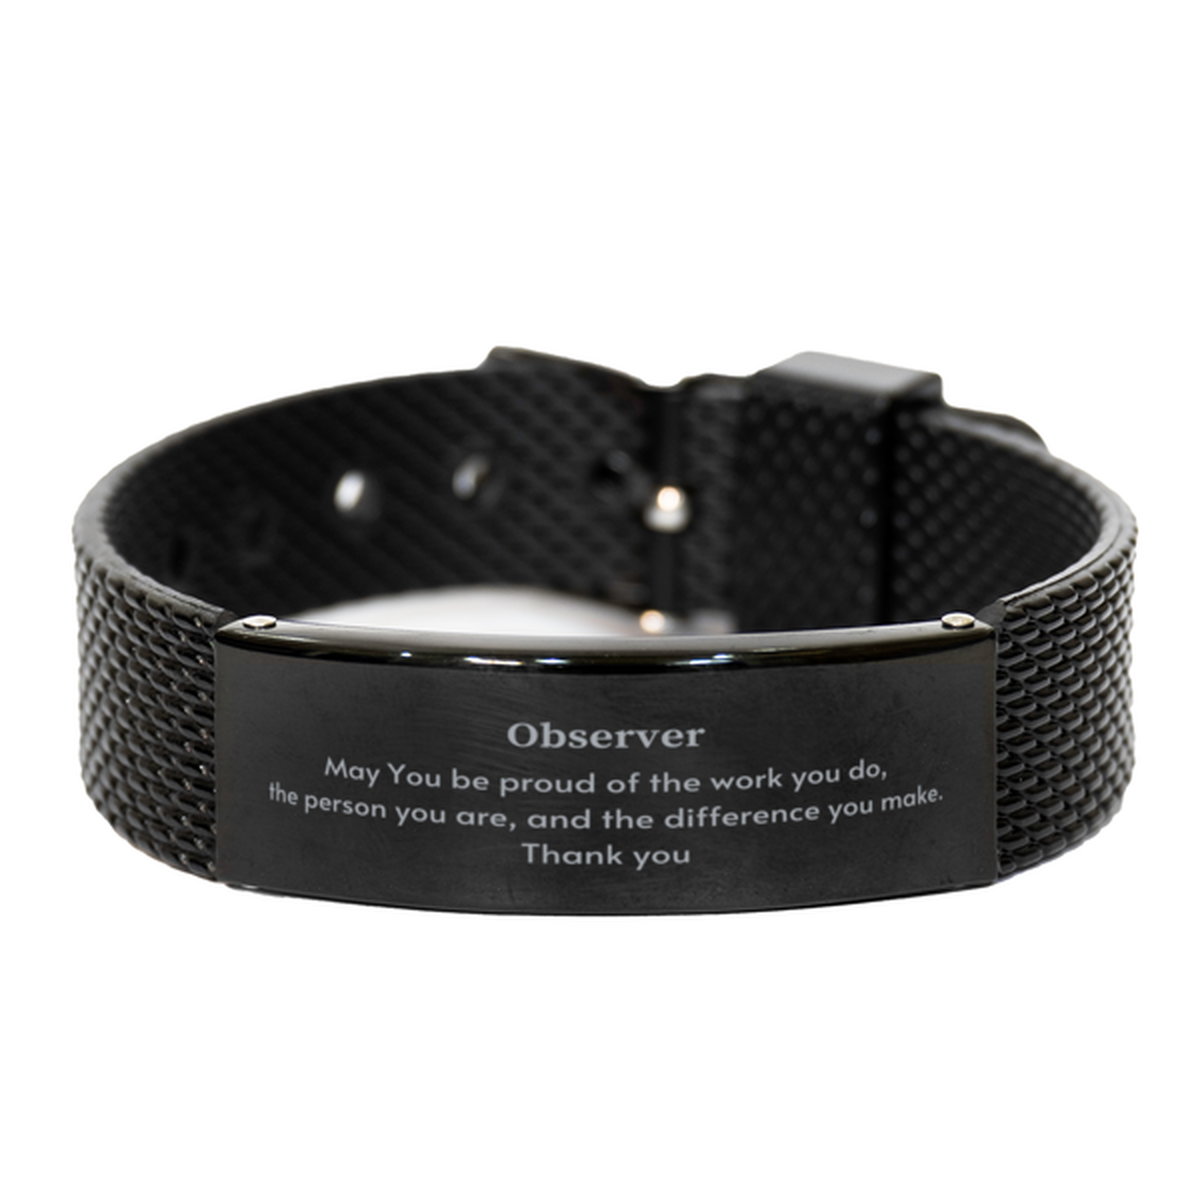 Heartwarming Black Shark Mesh Bracelet Retirement Coworkers Gifts for Observer, Observer May You be proud of the work you do, the person you are Gifts for Boss Men Women Friends